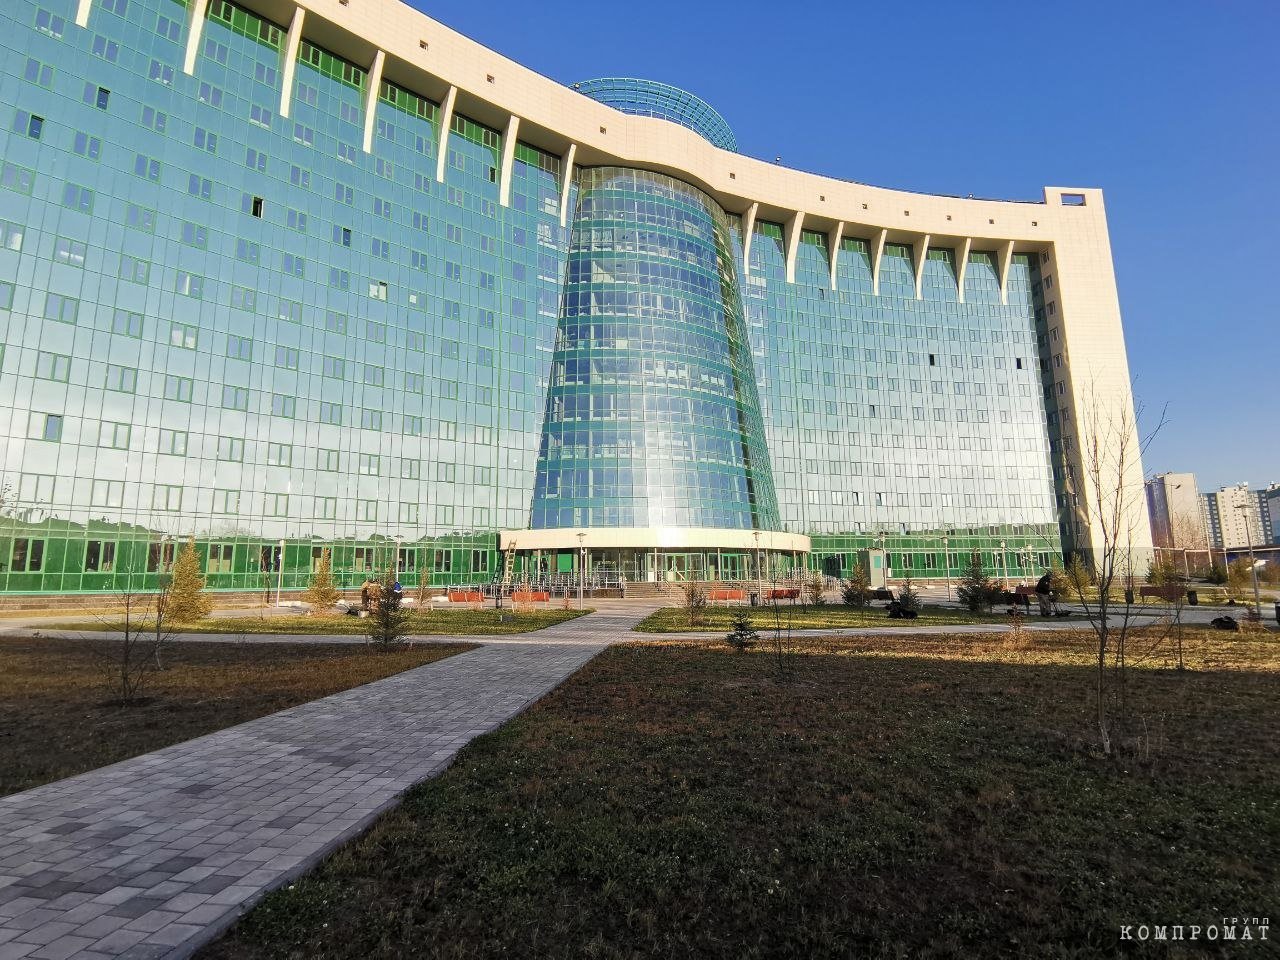 The long-suffering hospital in Nizhnevartovsk that has not yet been completed